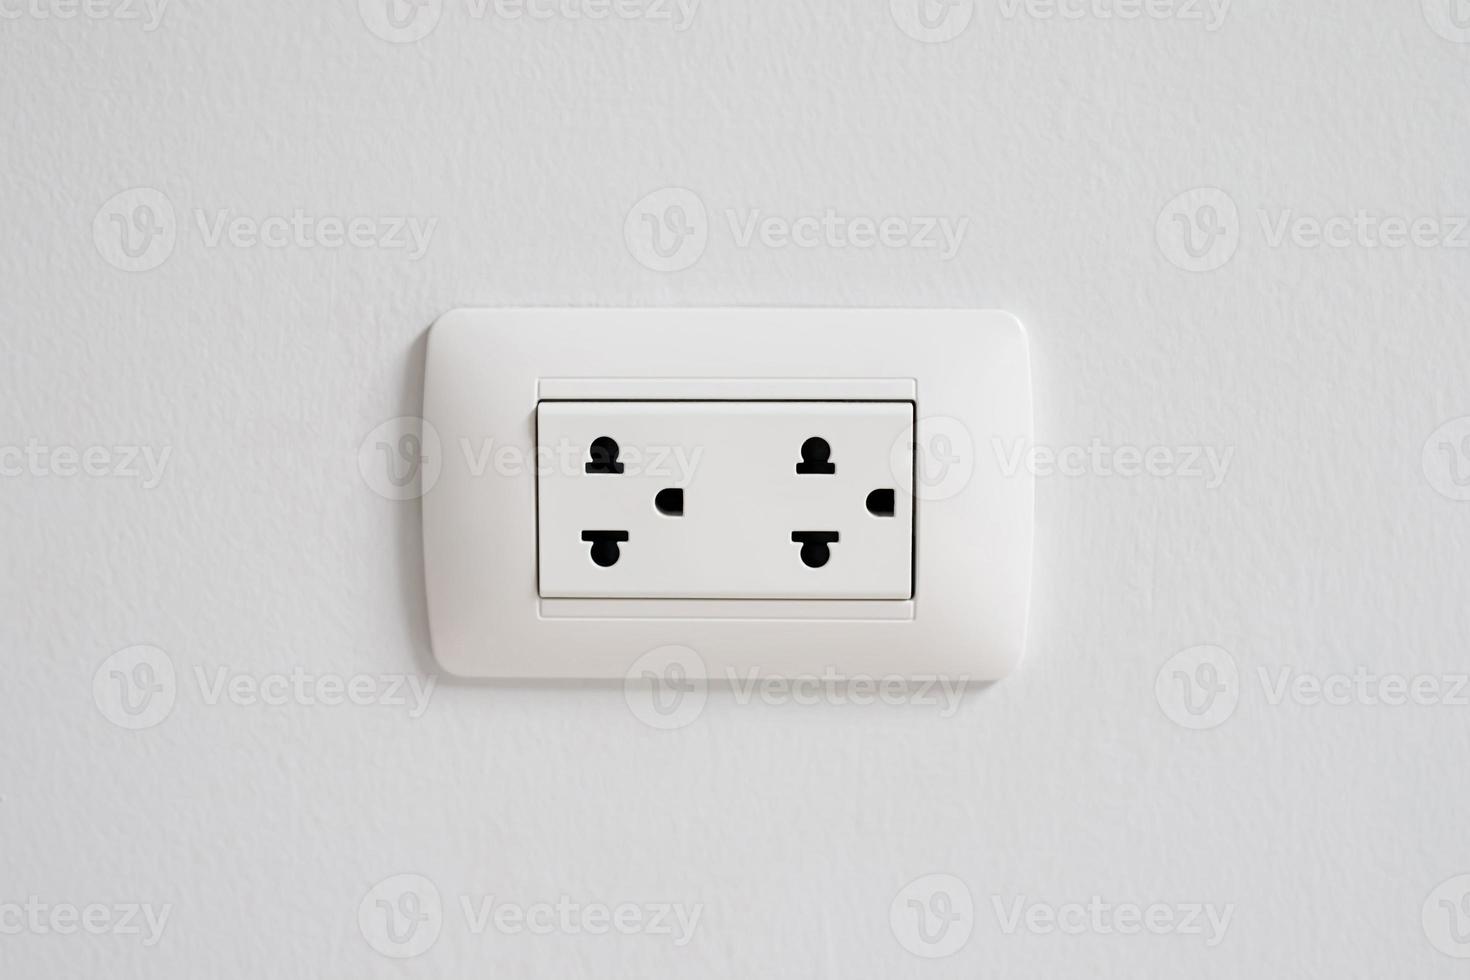 Turn off the power switch to save electricity in the house. photo